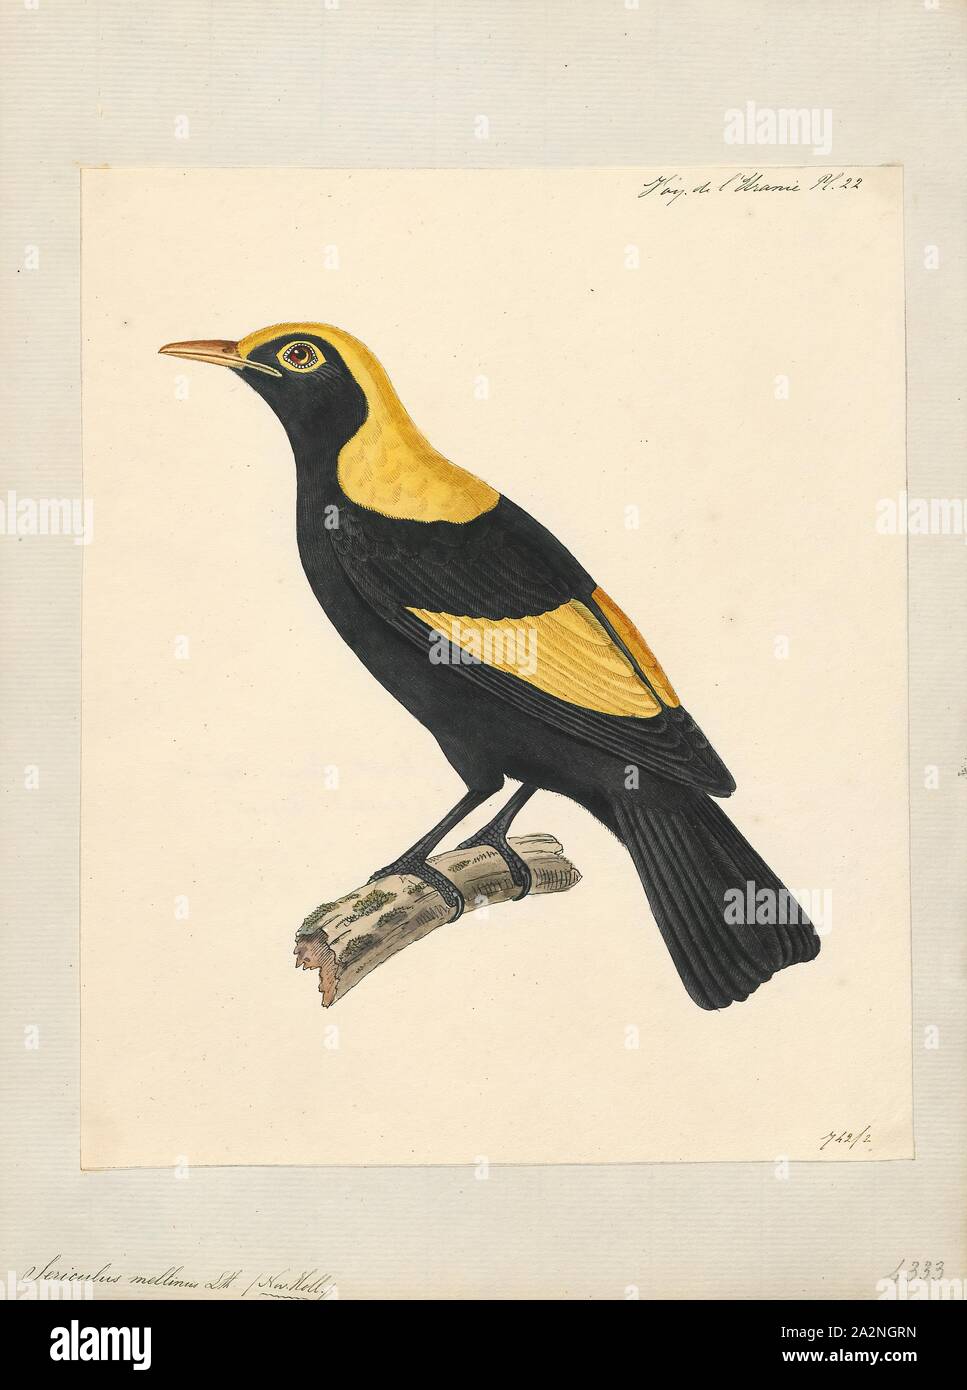 Sericulus melinus, Print, The genus Sericulus of the family Ptilonorhynchidae consists of three spectacularly colored bowerbirds., 1824-1839 Stock Photo